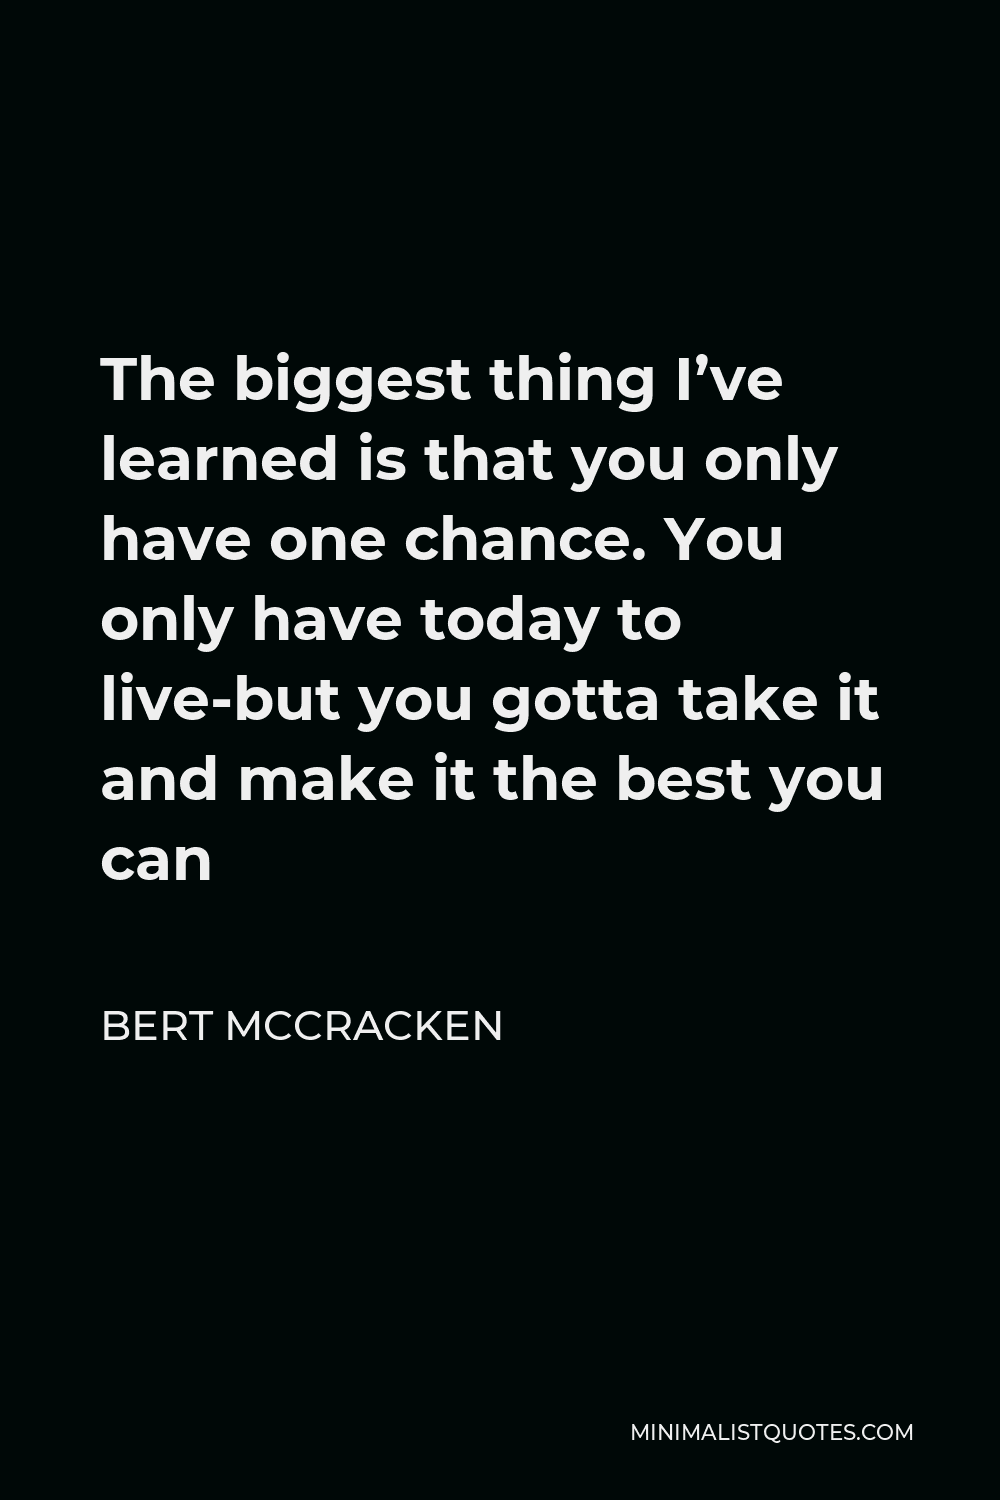 Bert McCracken Quote - The biggest thing I’ve learned is that you only have one chance. You only have today to live-but you gotta take it and make it the best you can